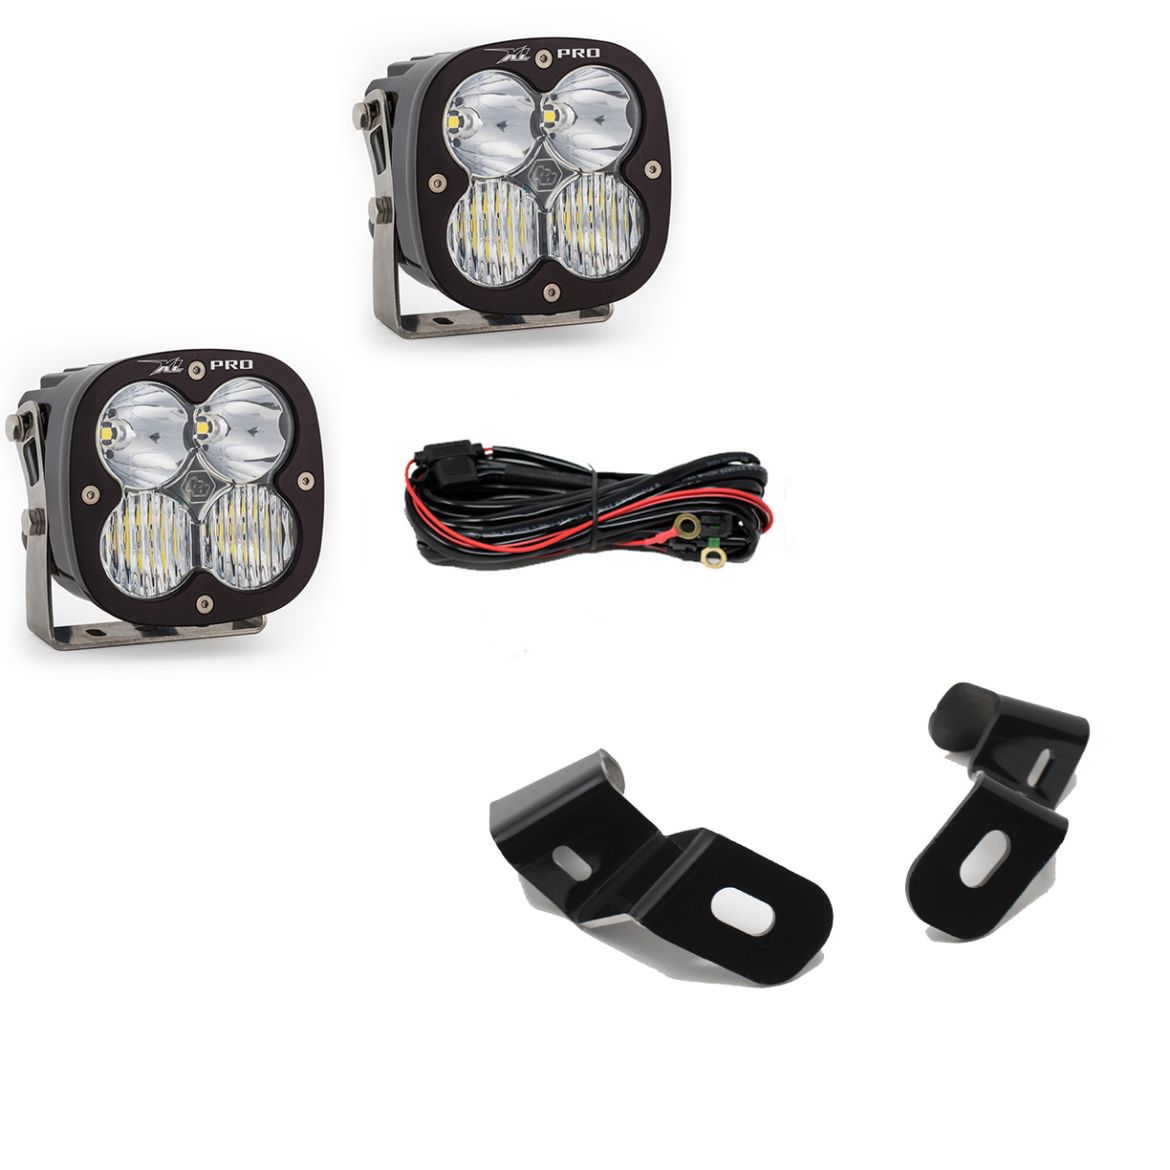 Picture of Dodge Ram LED Light Pods For Ram 2500/3500 19-On A-Pillar Kits XL Pro Driving Combo Baja Designs